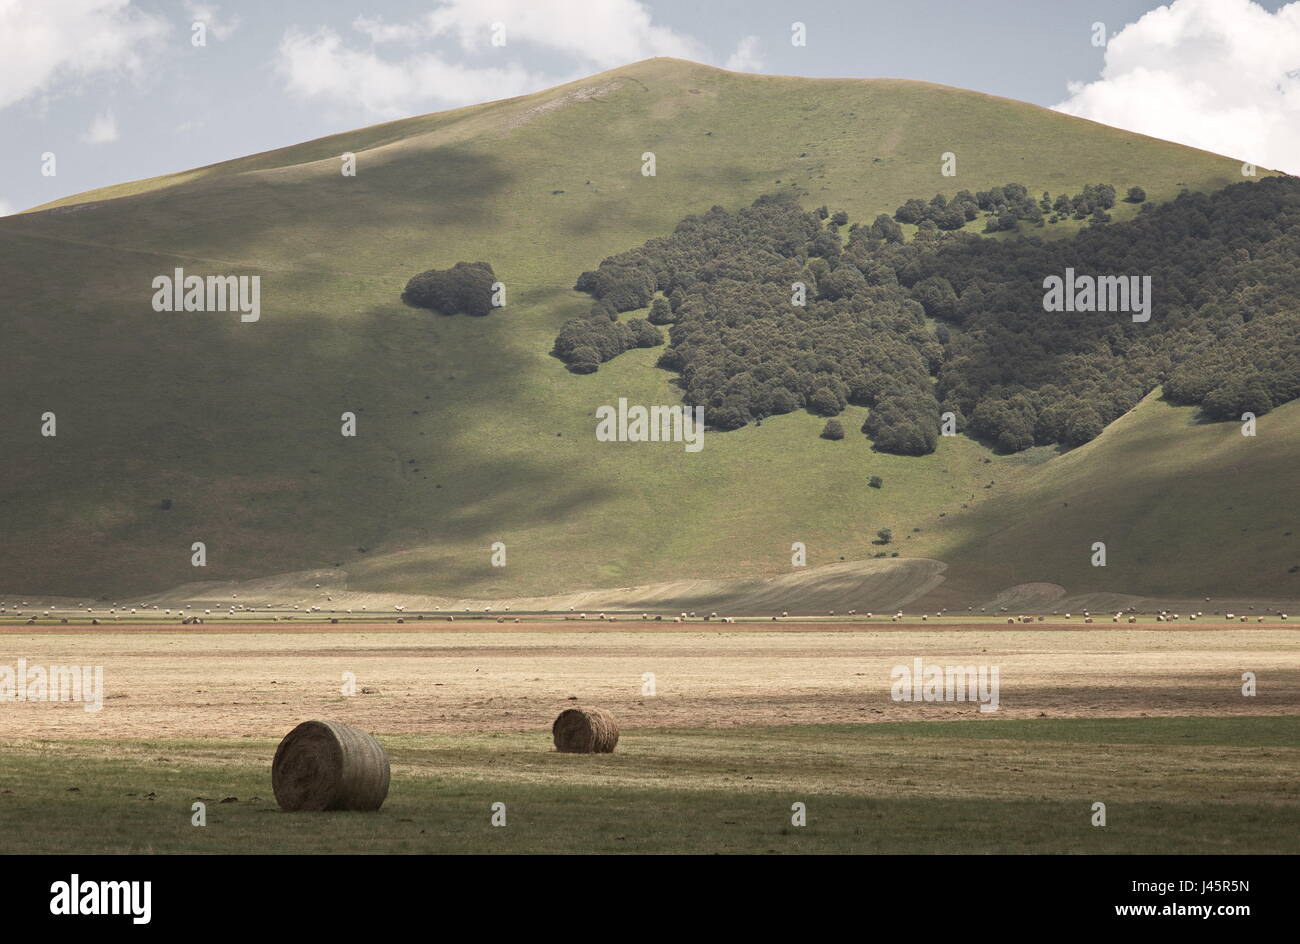 Some haybales in a field and a green hill with some trees in the background Stock Photo